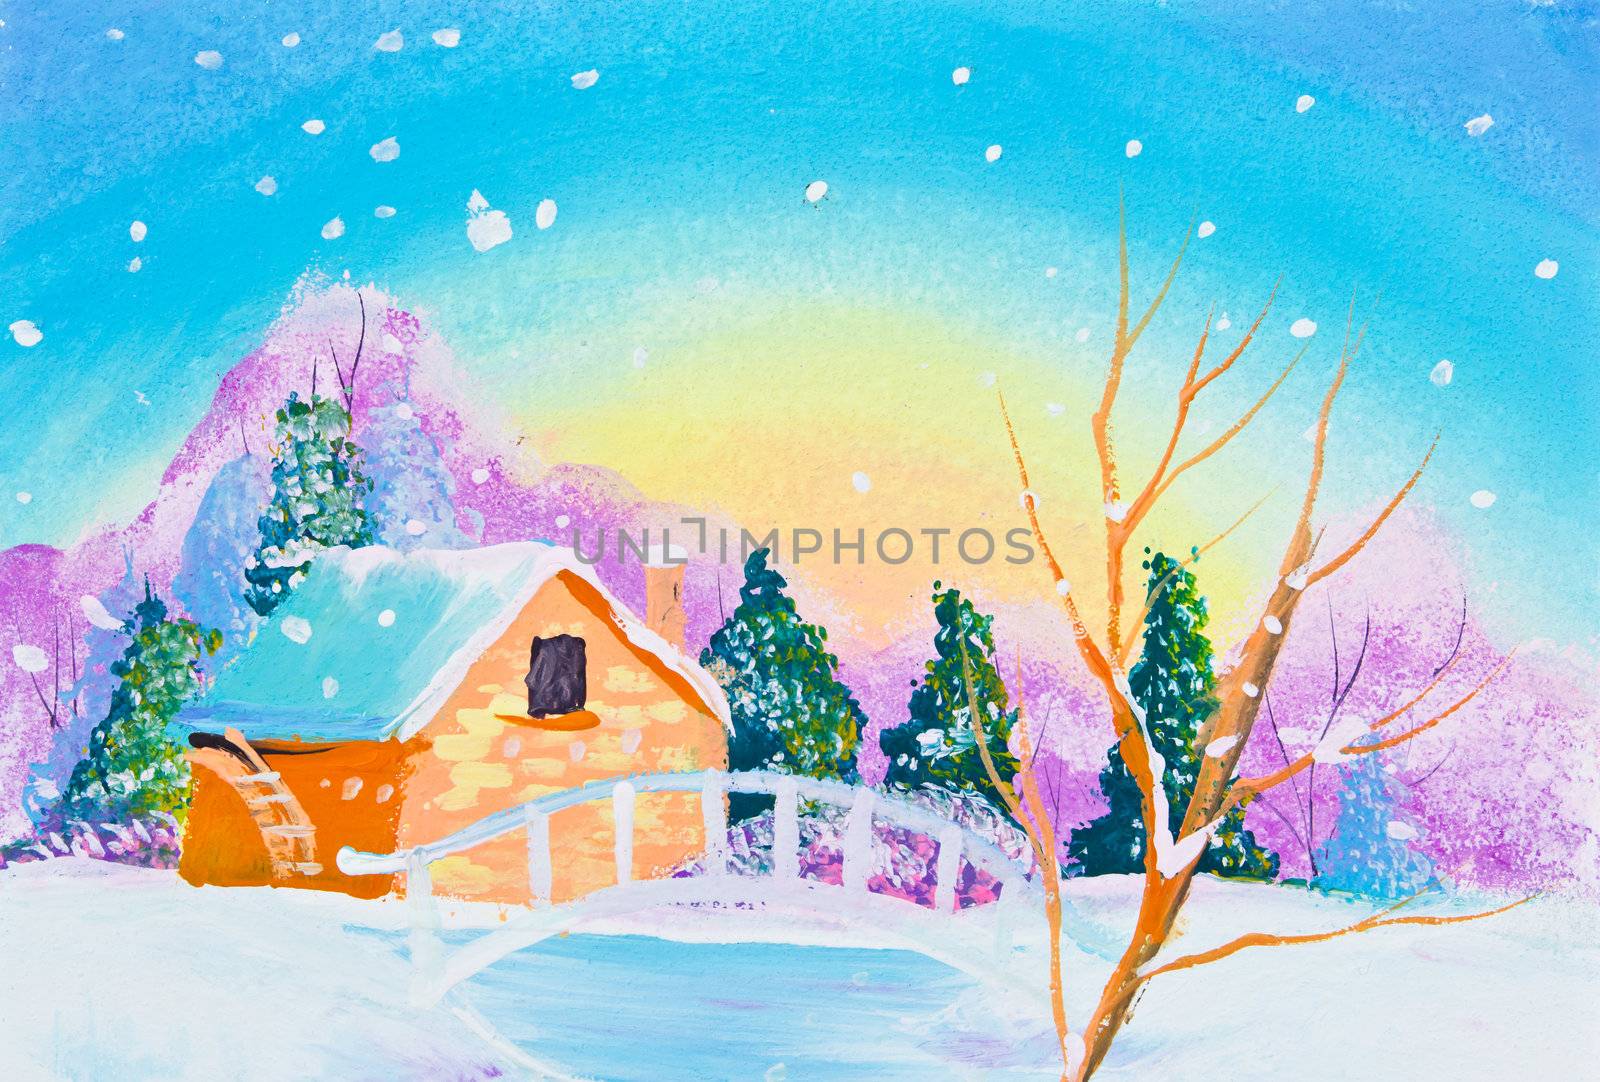 drawing of house and snow by tungphoto